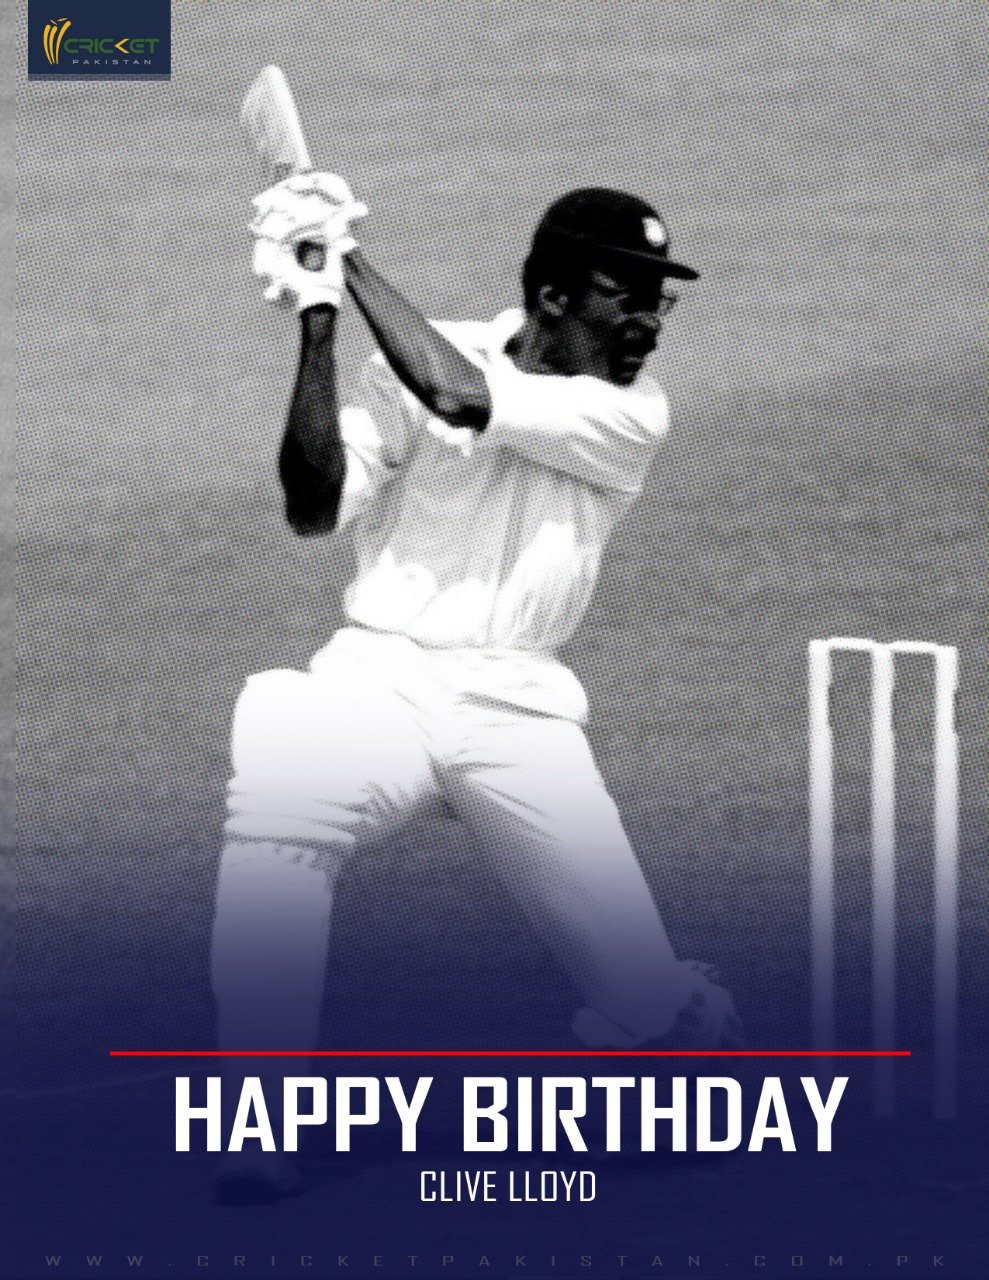 First West Indian to win 100 Test caps Two World Cup titles Happy birthday Clive Lloyd 